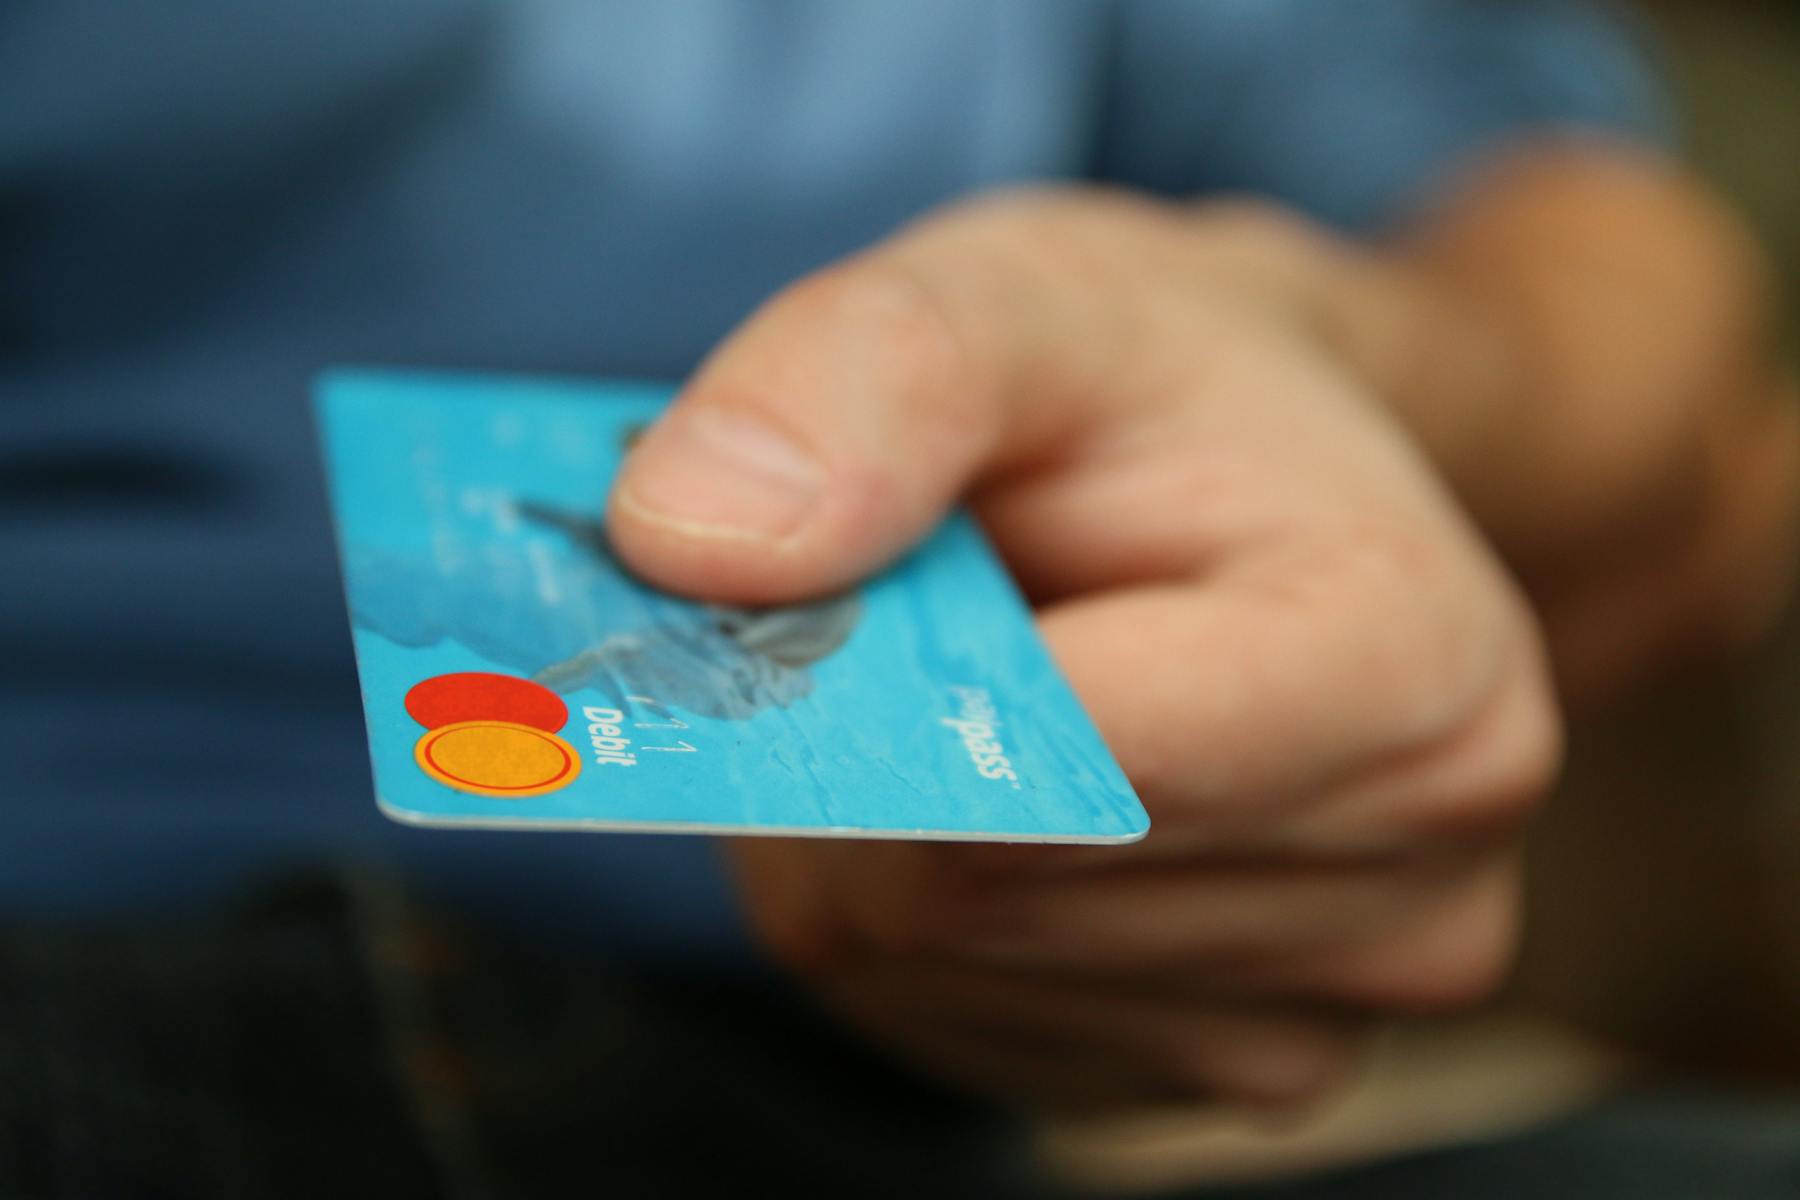 A person's hand holding a blue debit card